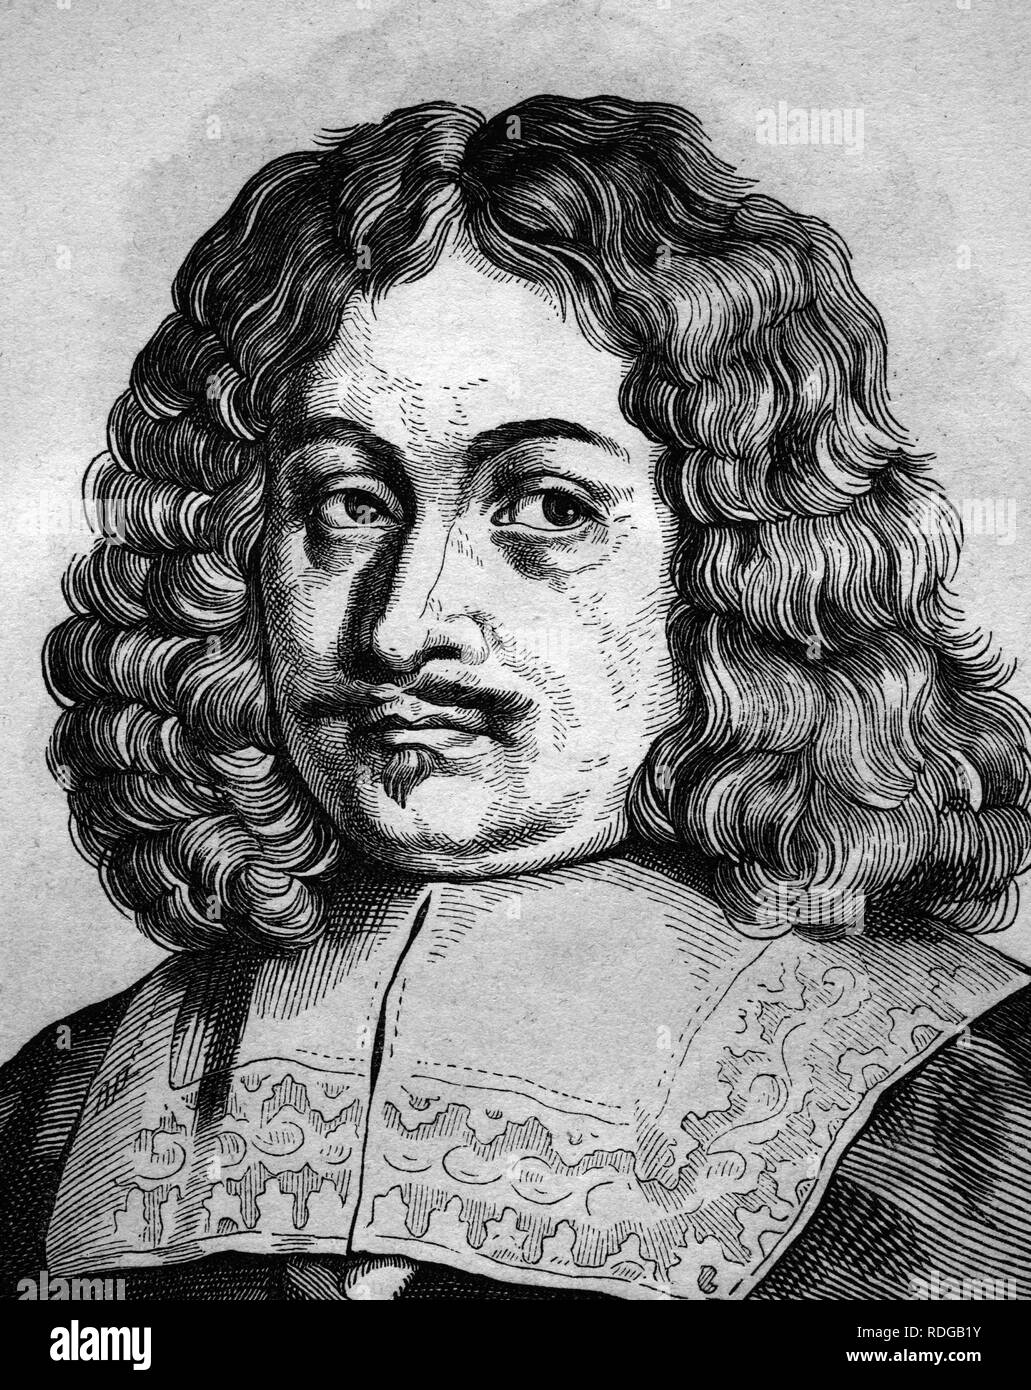 Andreas Gryphius, German poet and dramatist of the Baroque, 1616 - 1664, historical illustration, portrait, 1880 Stock Photo